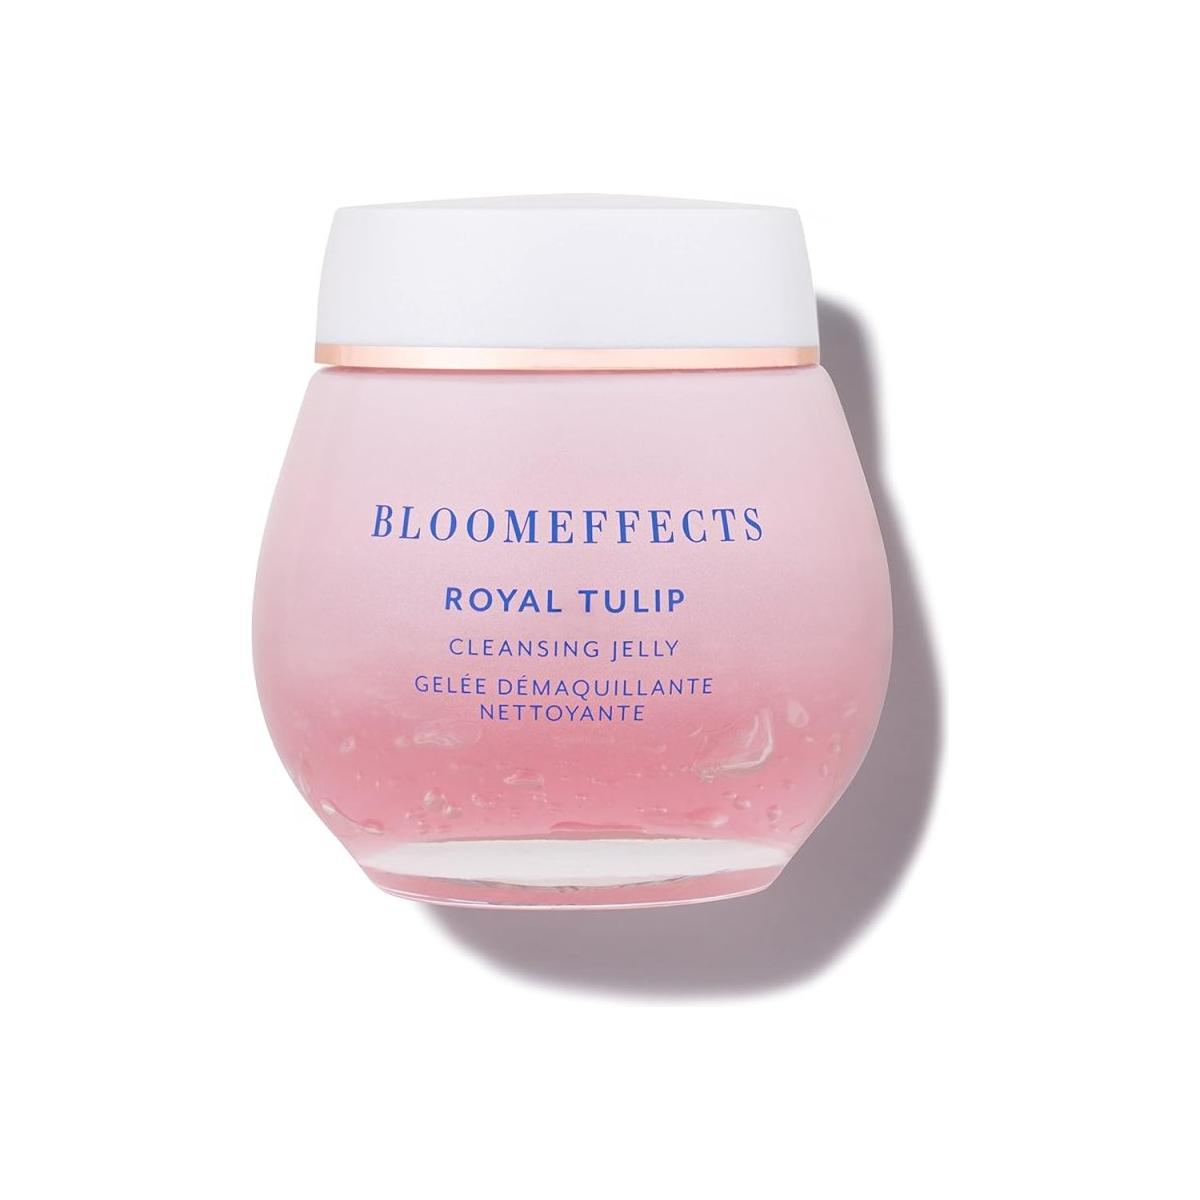 Bloomeffects Royal Tulip Cleansing Jelly - 80ml - Glam Global UK